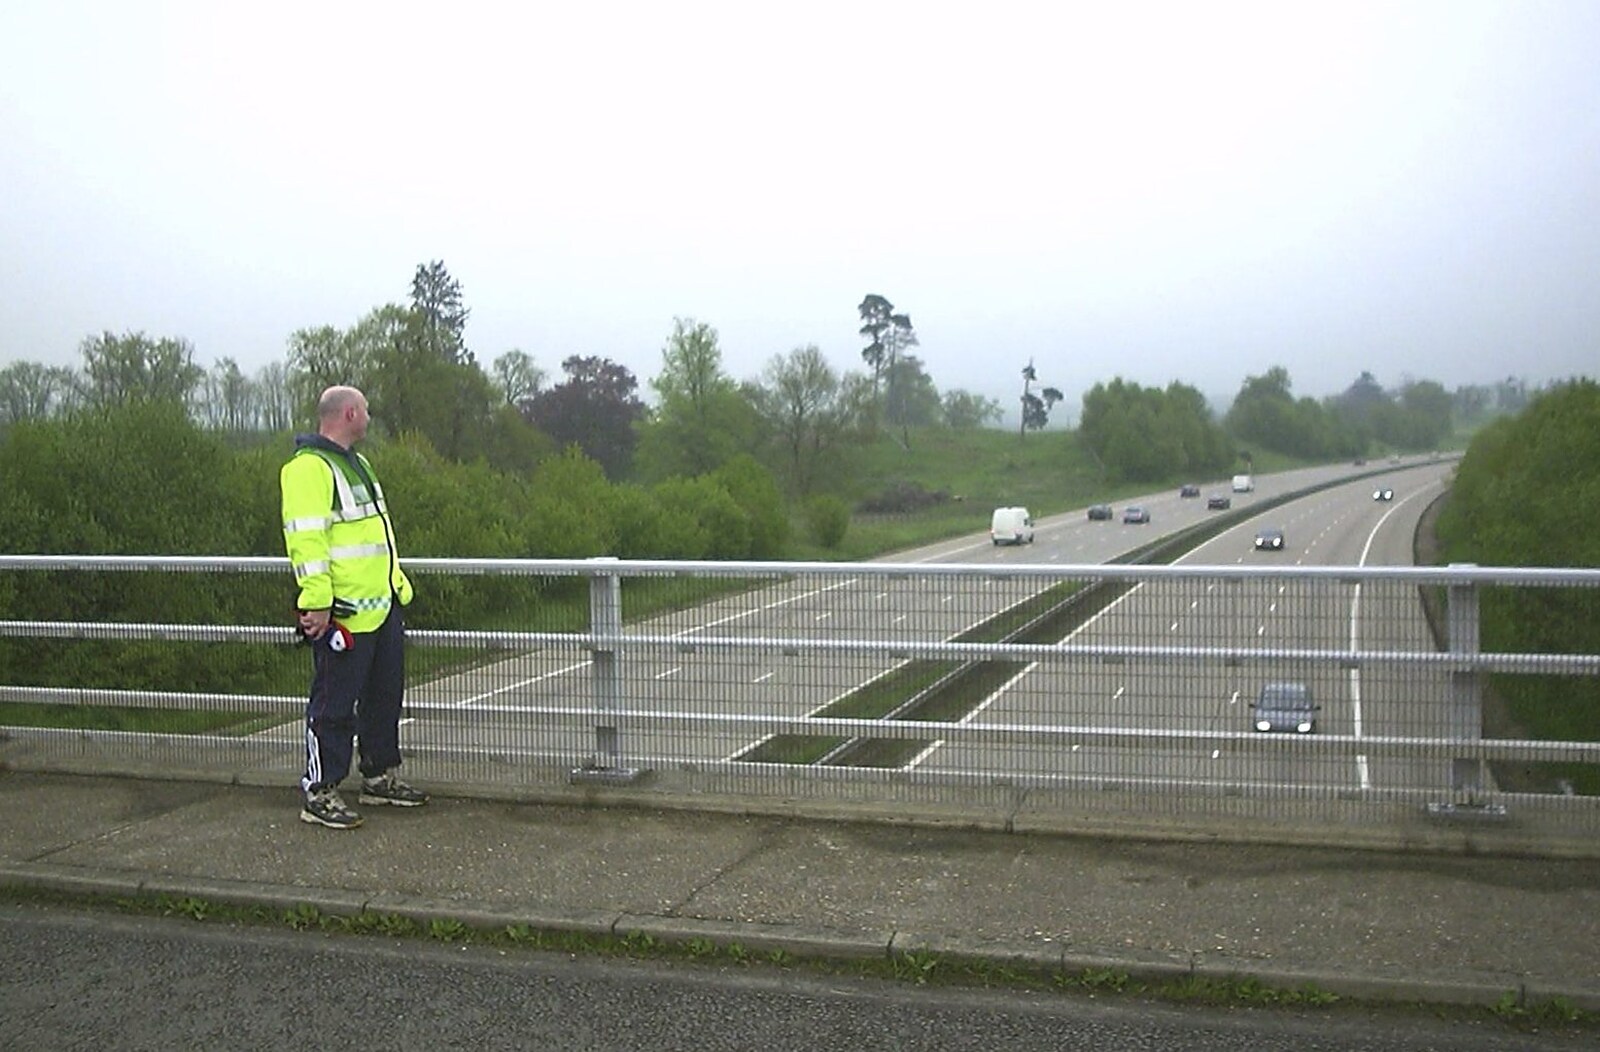 The BSCC Annual Bike Ride, Lenham, Kent - 8th May 2004: Gov pretends to be a traffic rozzer on the M20